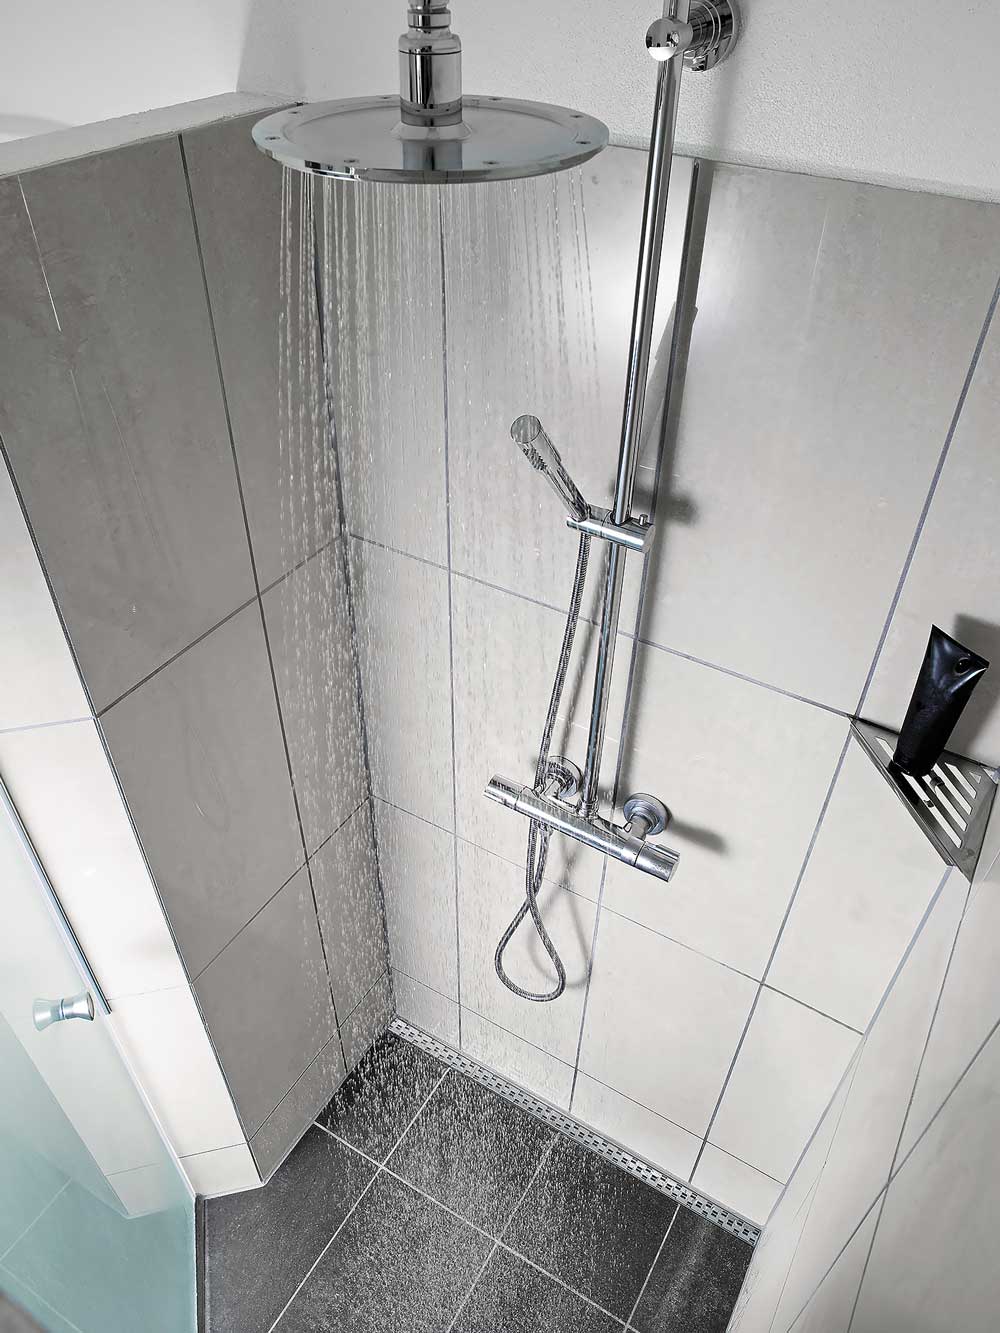 Linear shower drains create accessible spaces for older users